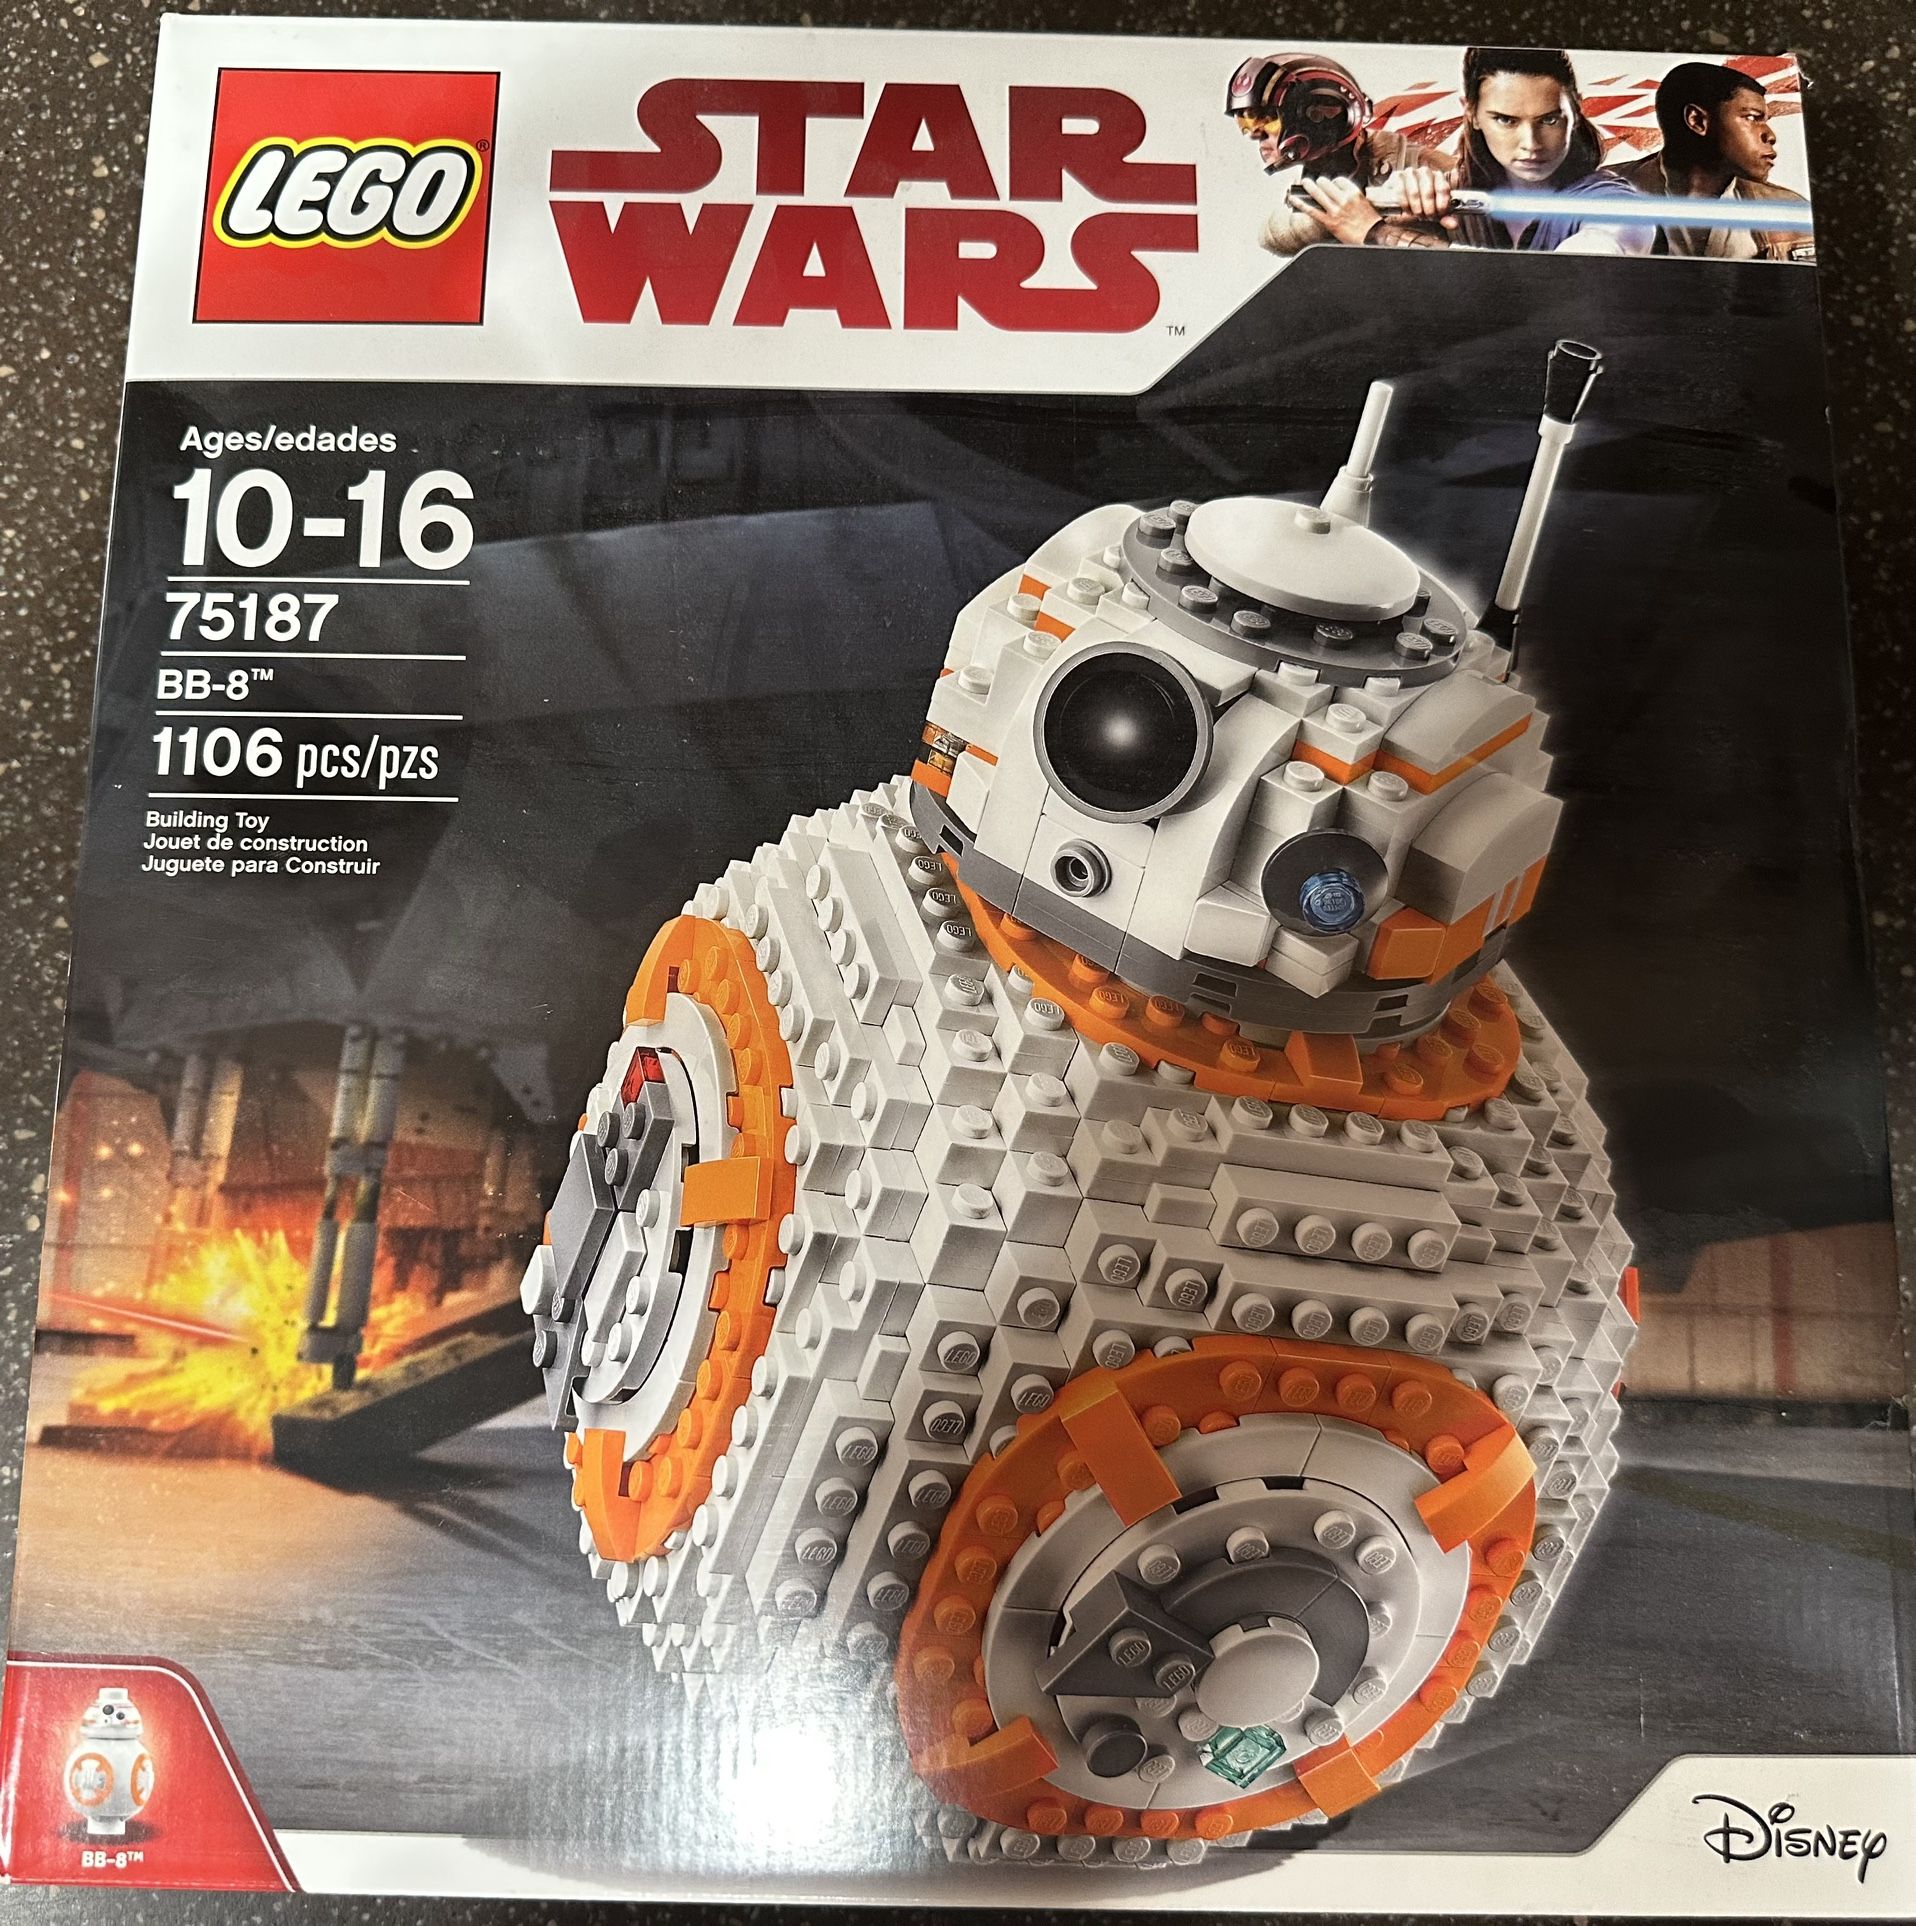 LEGO Star Wars 75187 BB-8 for Sale in Pines, - OfferUp